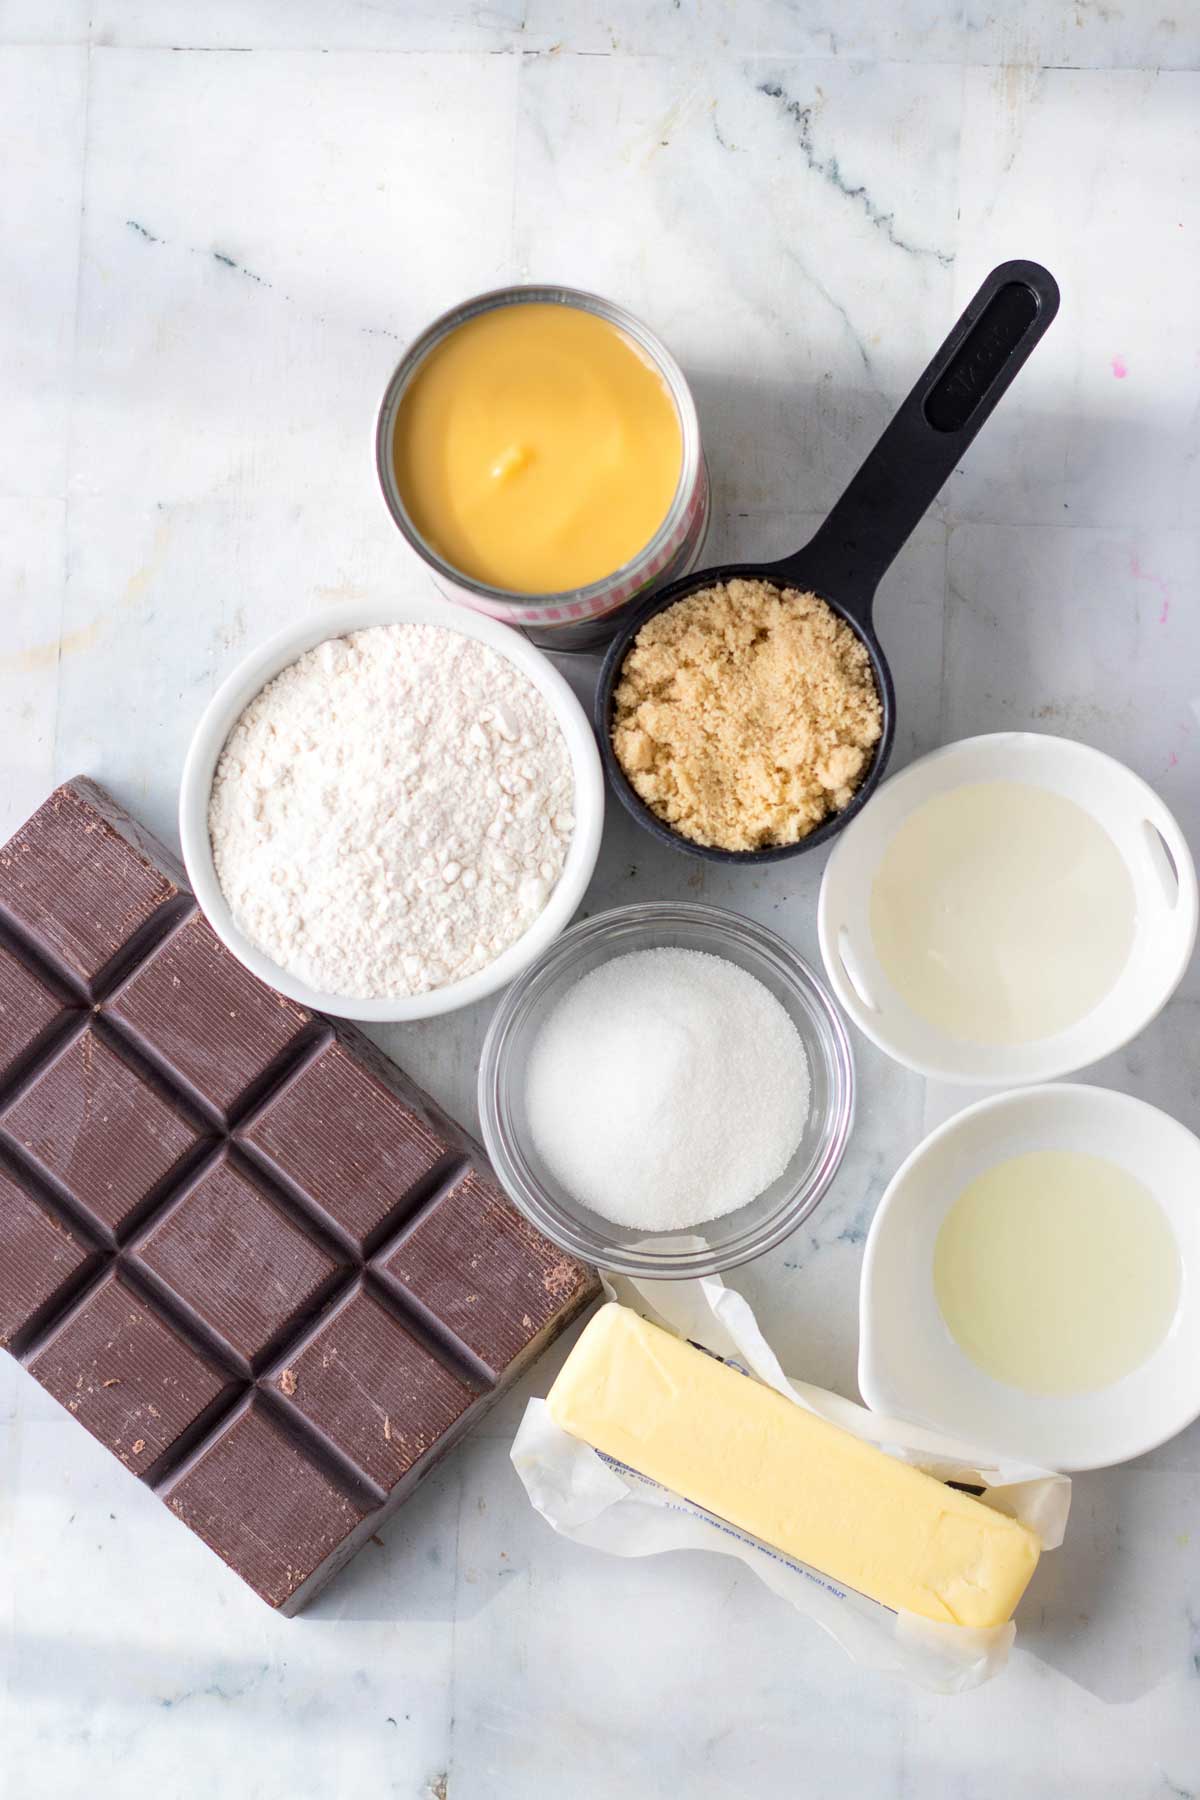 Ingredients for Homemade Twix Bars include granulated sugar, flour, butter- slightly softened, light brown sugar, butter, sweetened condensed milk, corn syrup, chocolate almond bark and oil- (melted coconut oil or vegetable oil for best results)